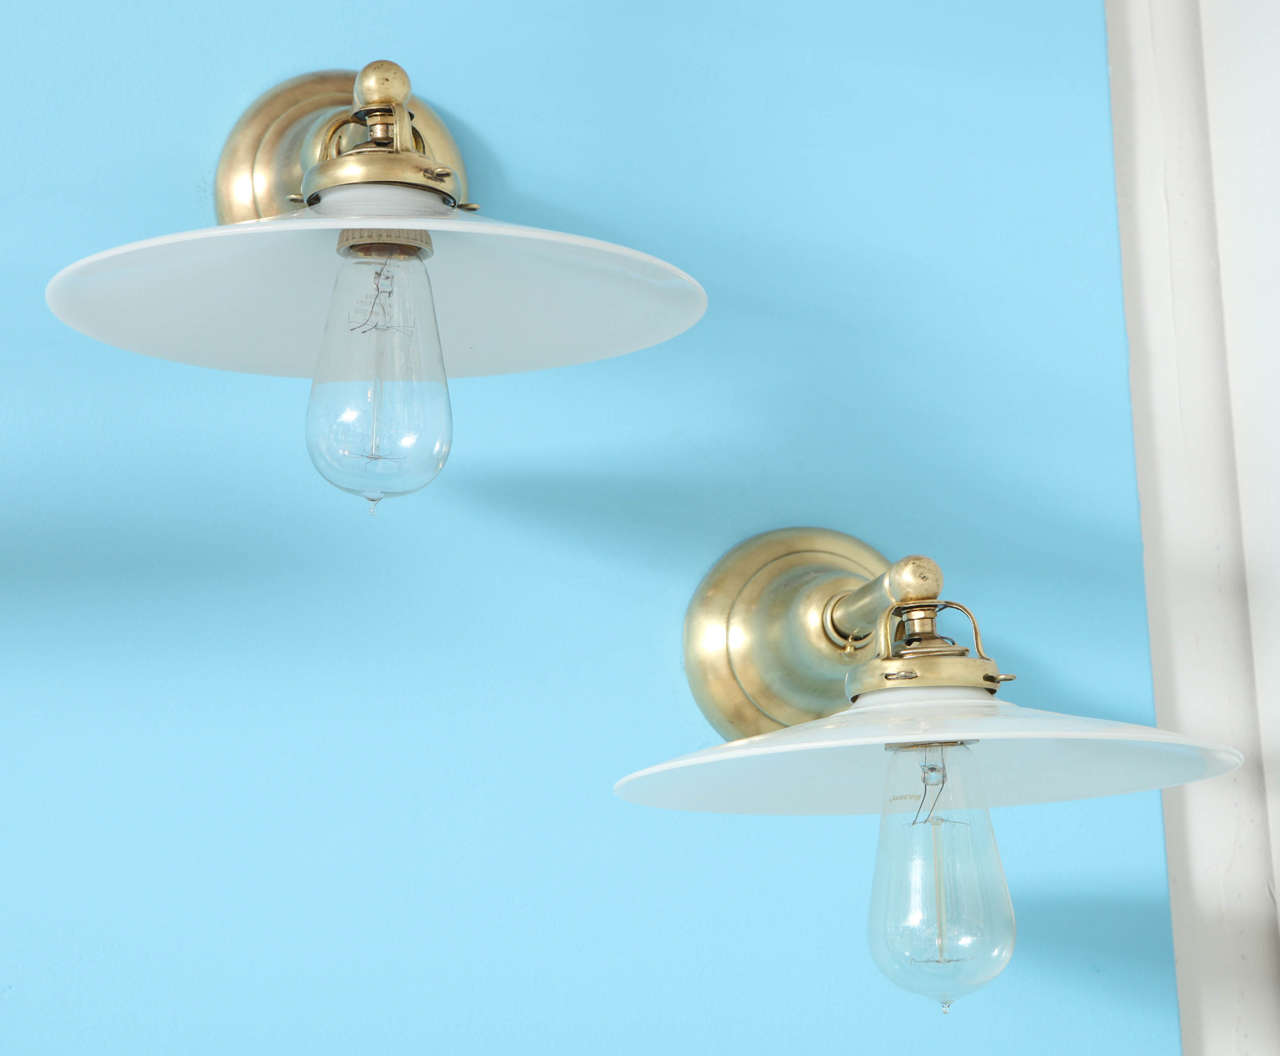 Pair of vintage brass wall lights or sconces with antique white milk glass disk shades. USA, circa 1910. Extended arms hold a 10 inch diameter shade.

Dimensions:
4.5 inch wall plate diameter (part that mounts to wall)
13 inch depth overall or